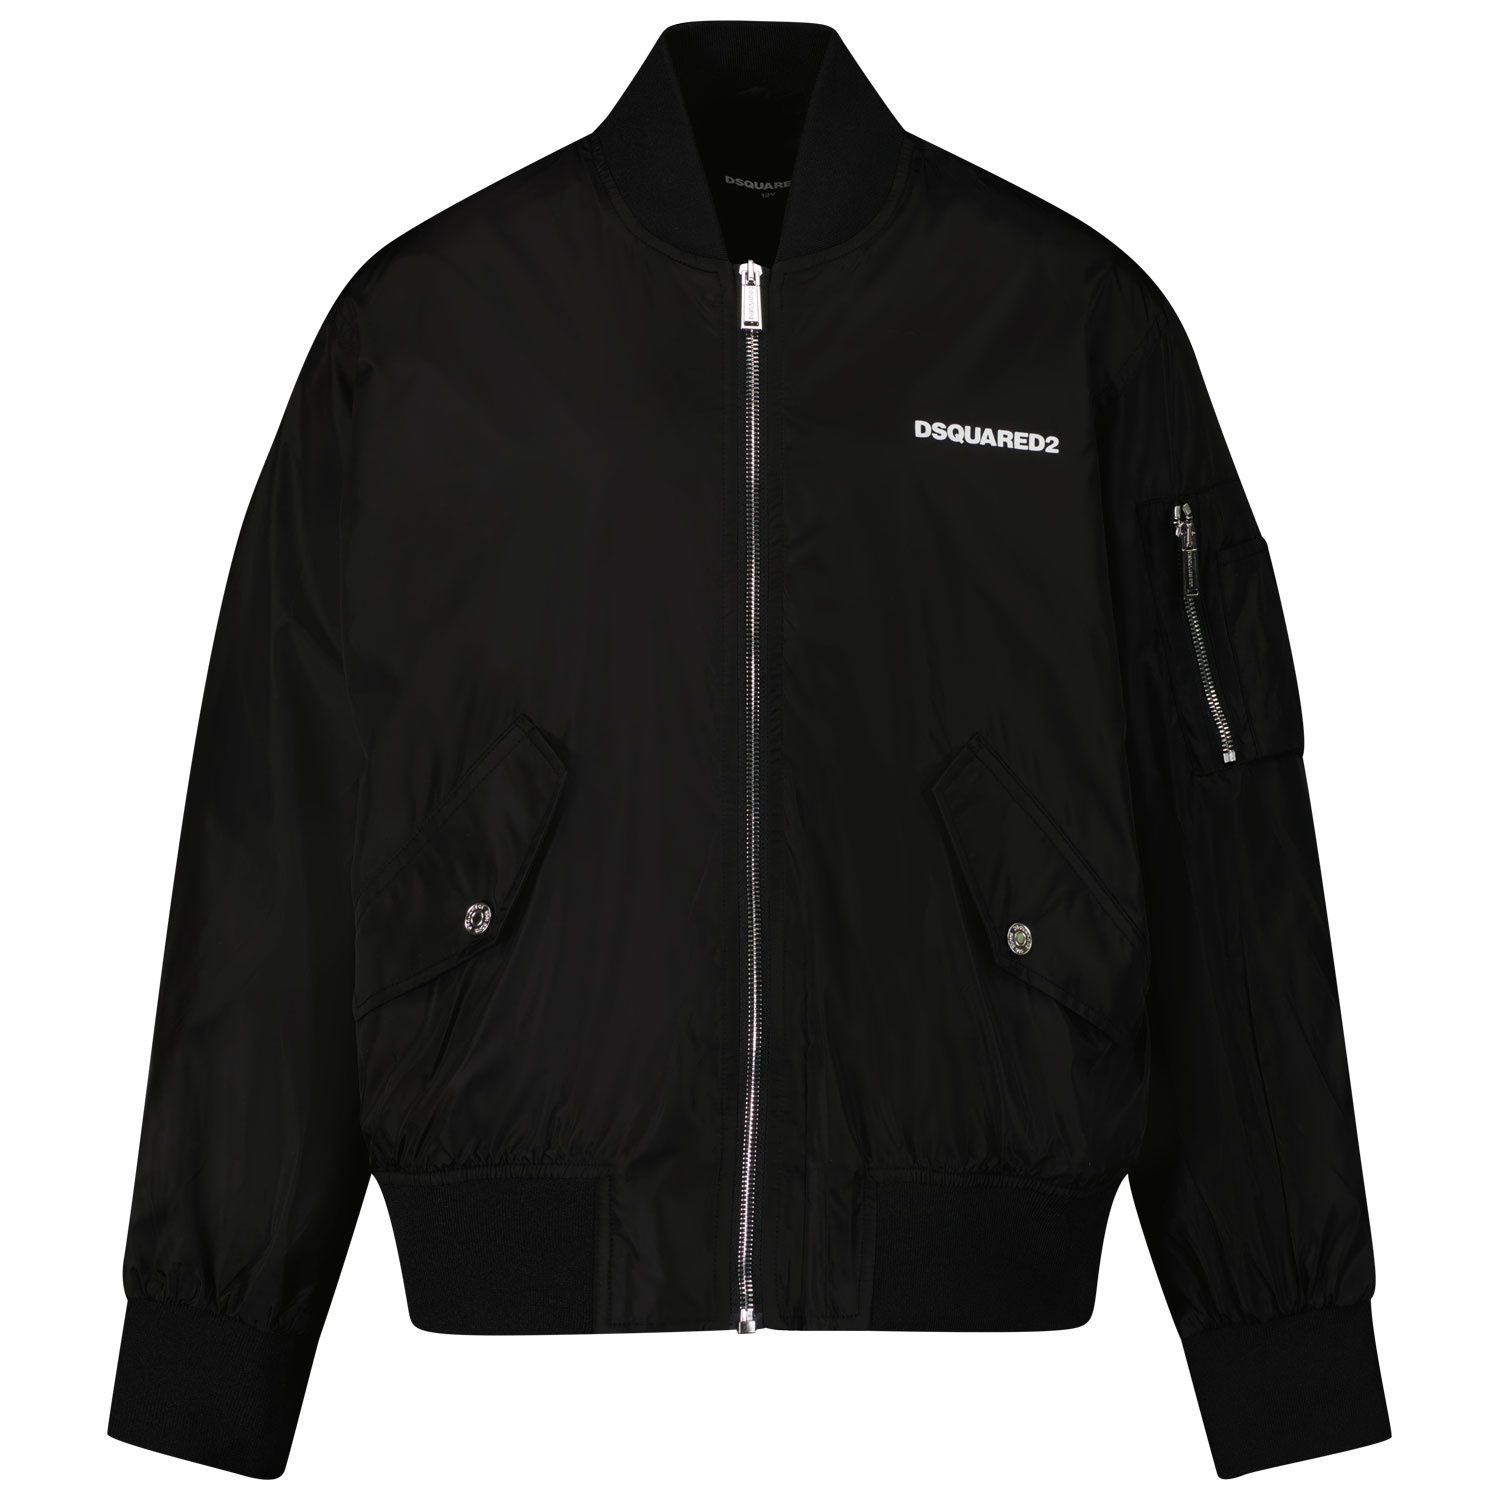 Picture of Dsquared2 DQ0766 kids jacket black